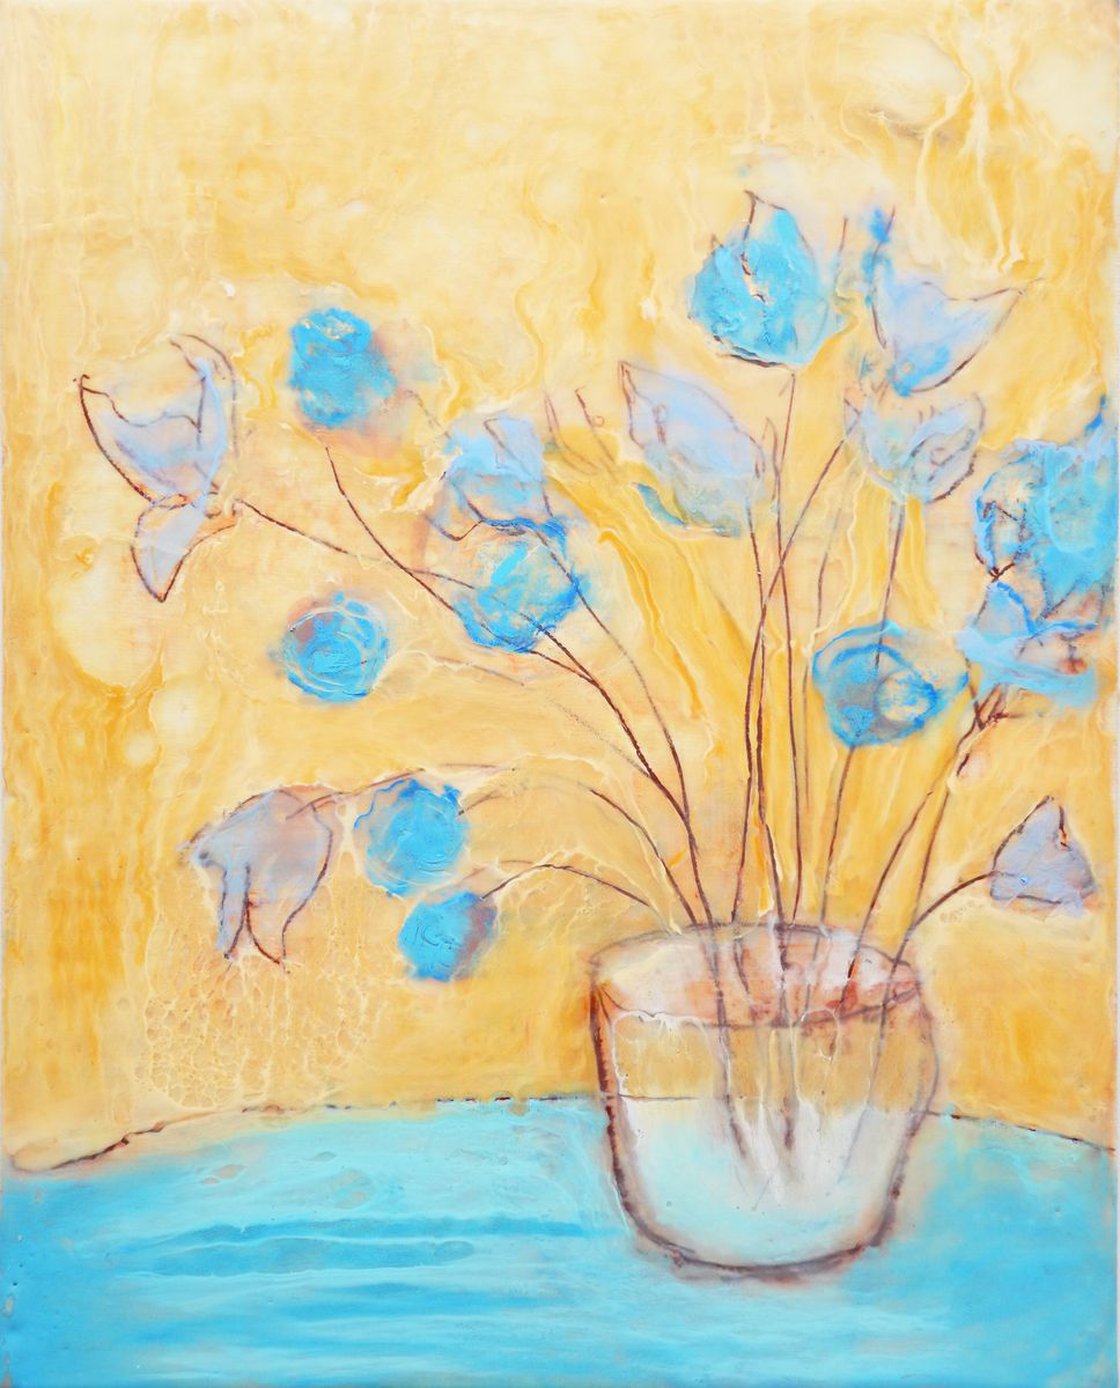 Encaustic Painting on a Budget; 9 Cost Saving Tips